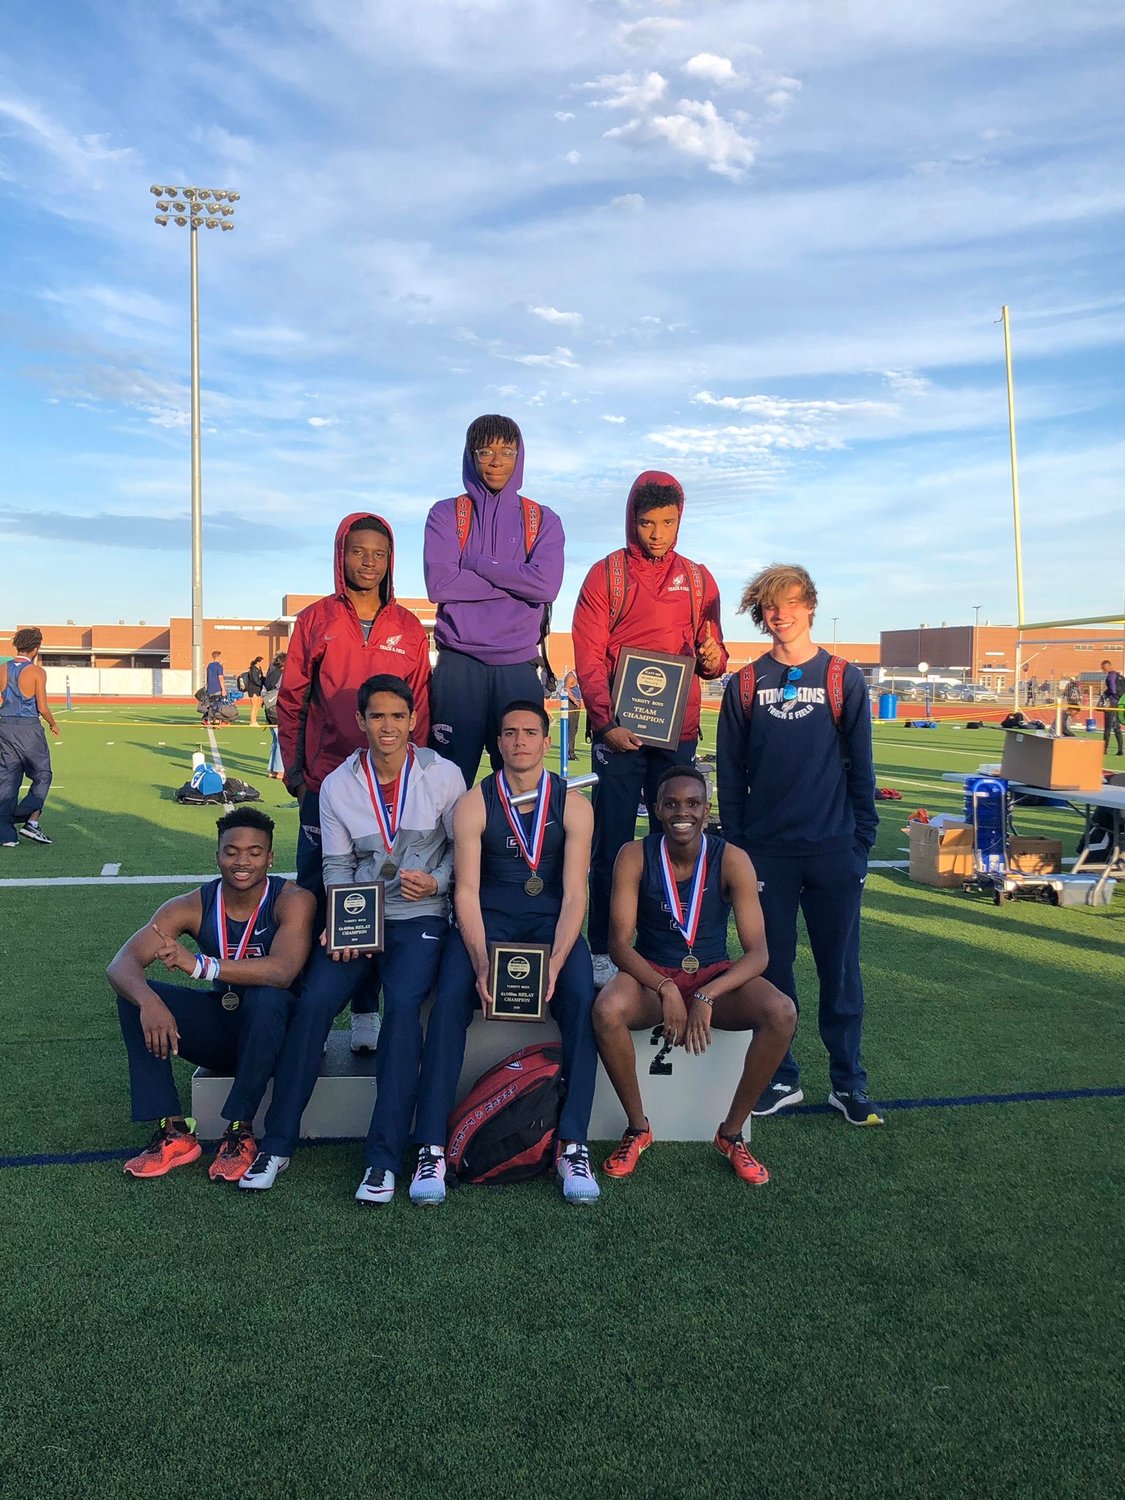 Tompkins’ boys won the team championship at the Bubba Fife Relays on Feb. 29 at Paetow High, scoring 111 points in a 26-team field.